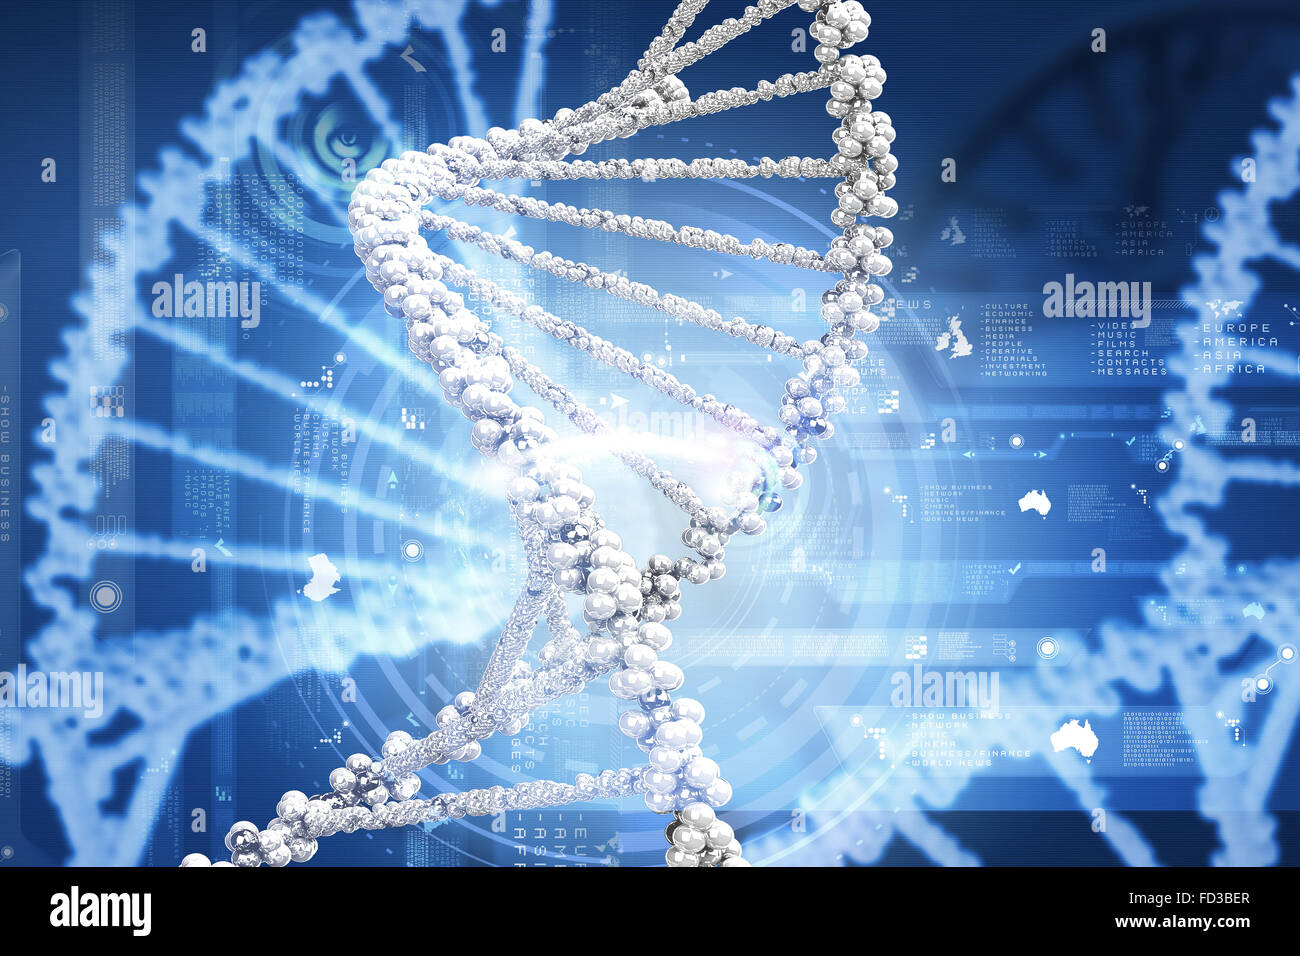 Background high tech image of dna molecule Stock Photo